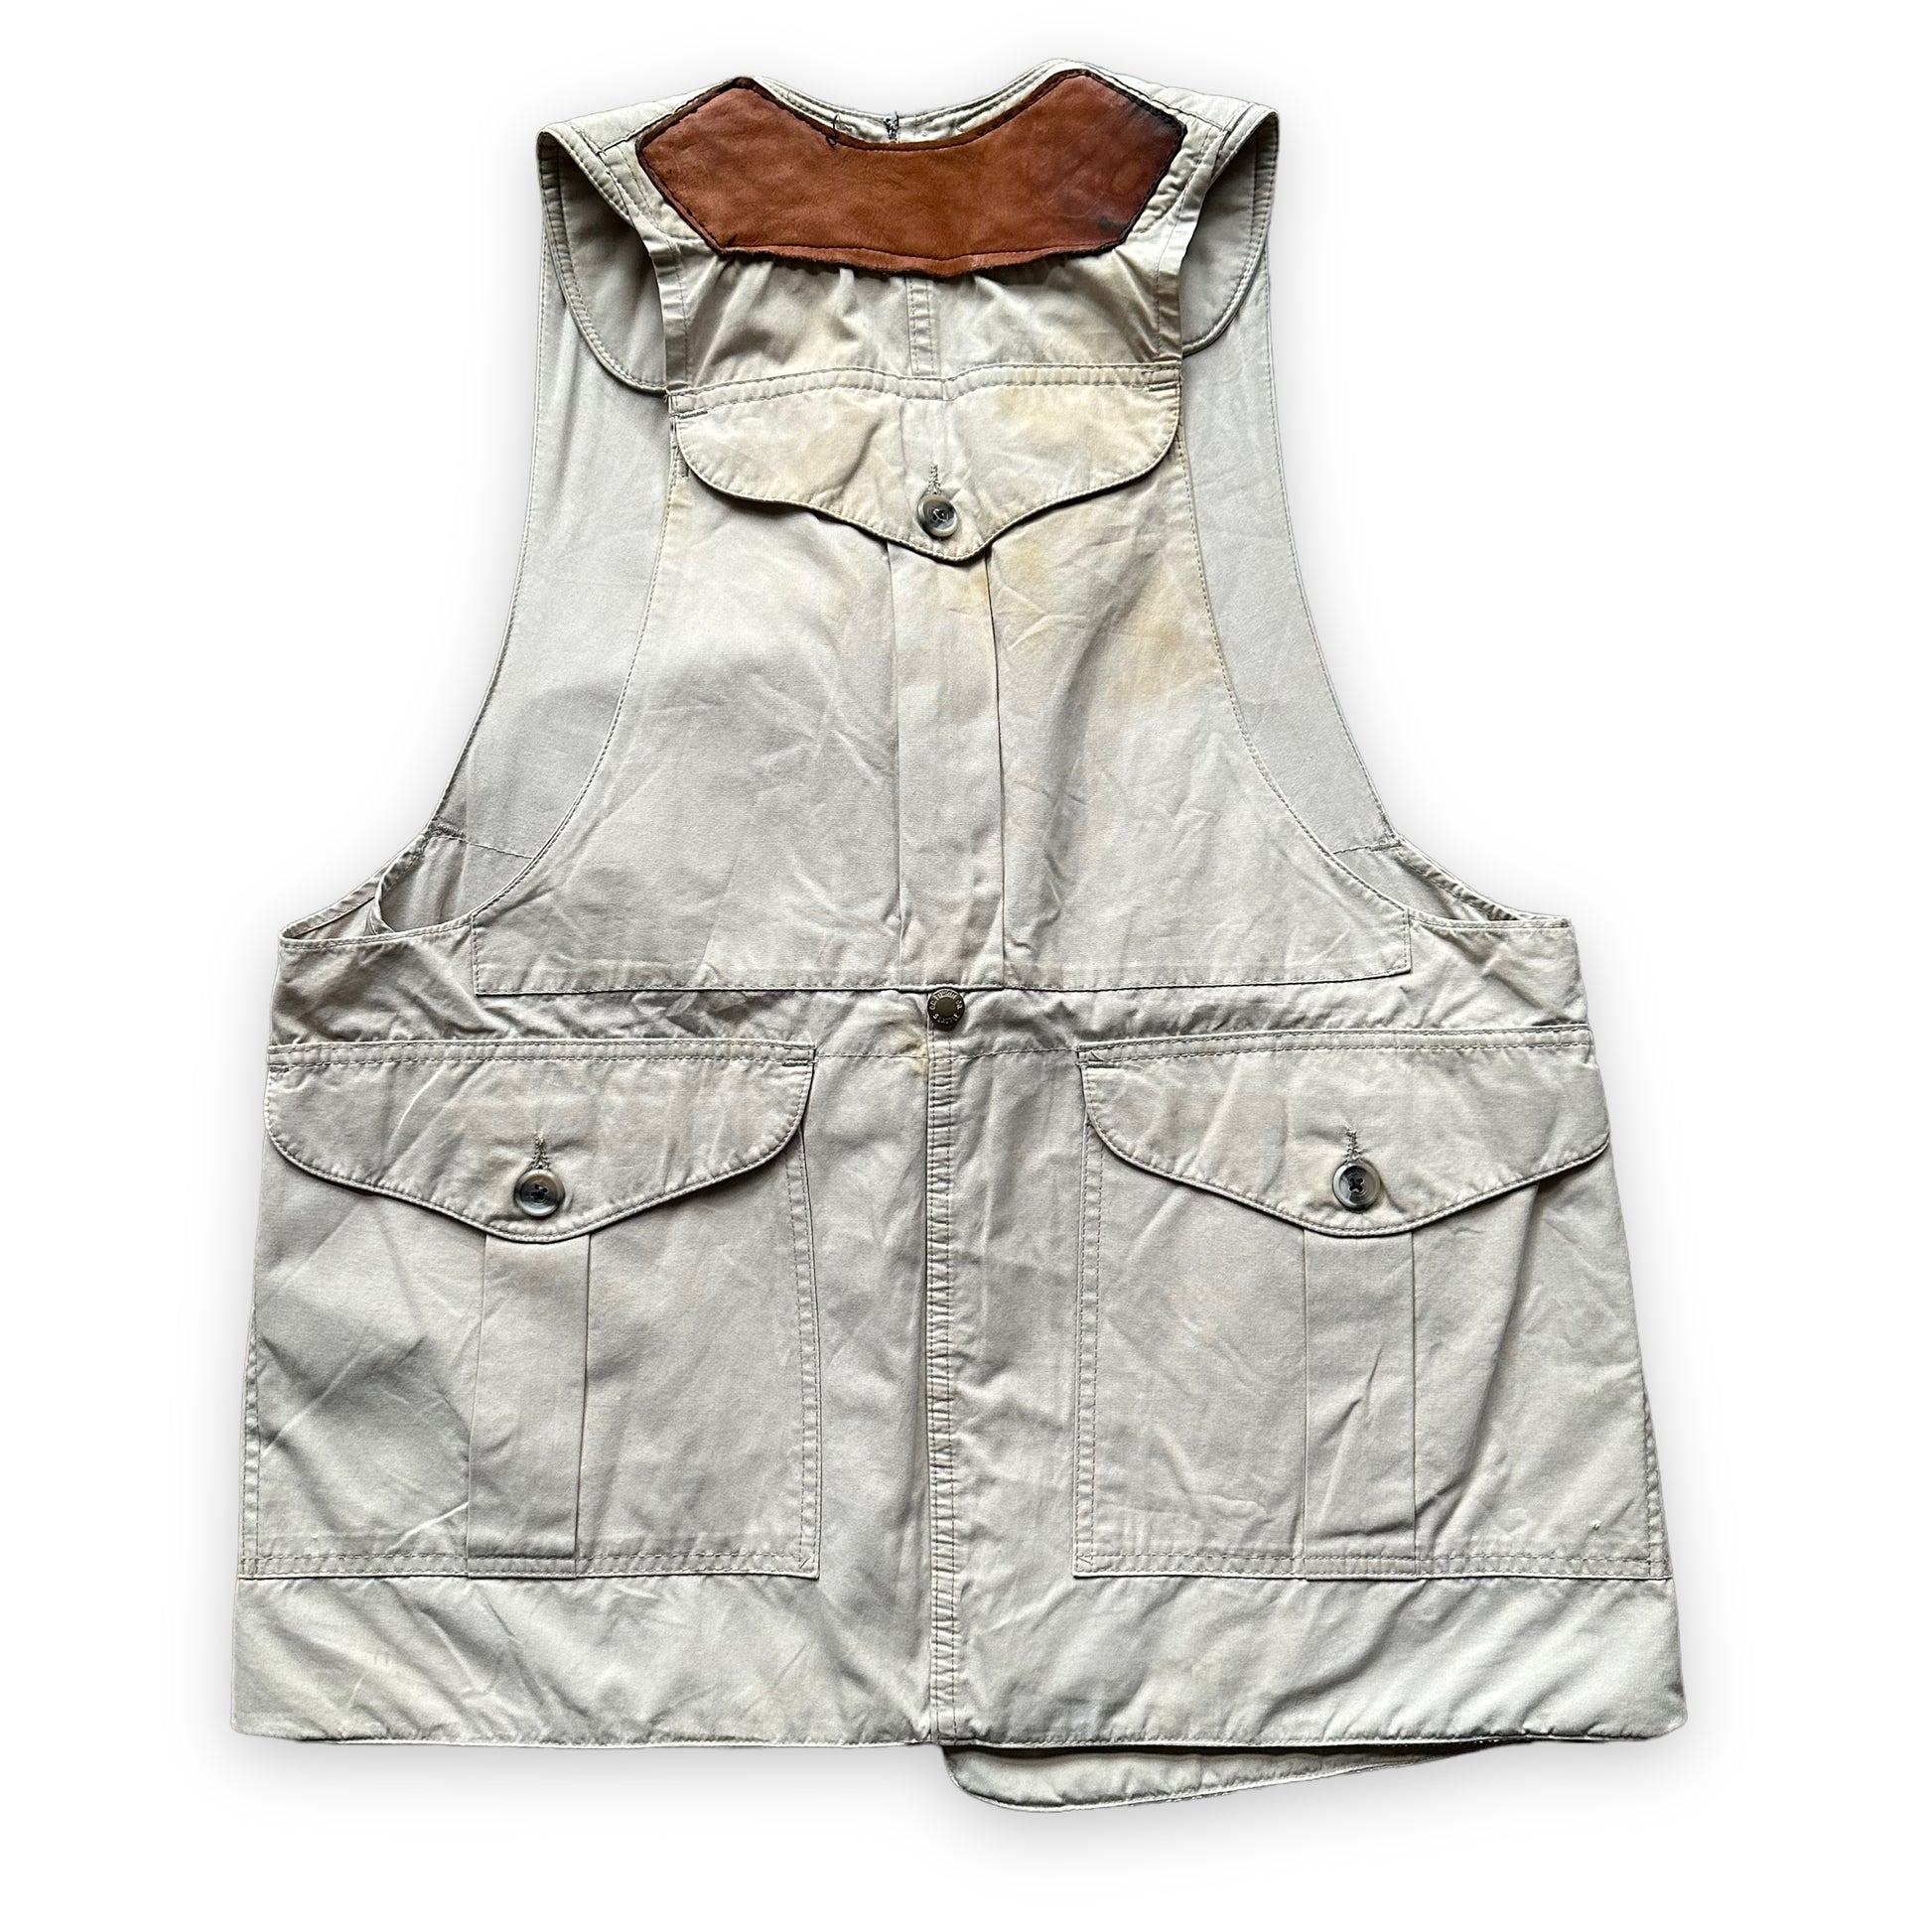 Rear View of Filson Half Moon Vest With Leather Additions SZ M |  Vintage Filson Seattle | Barn Owl Vintage Seattle